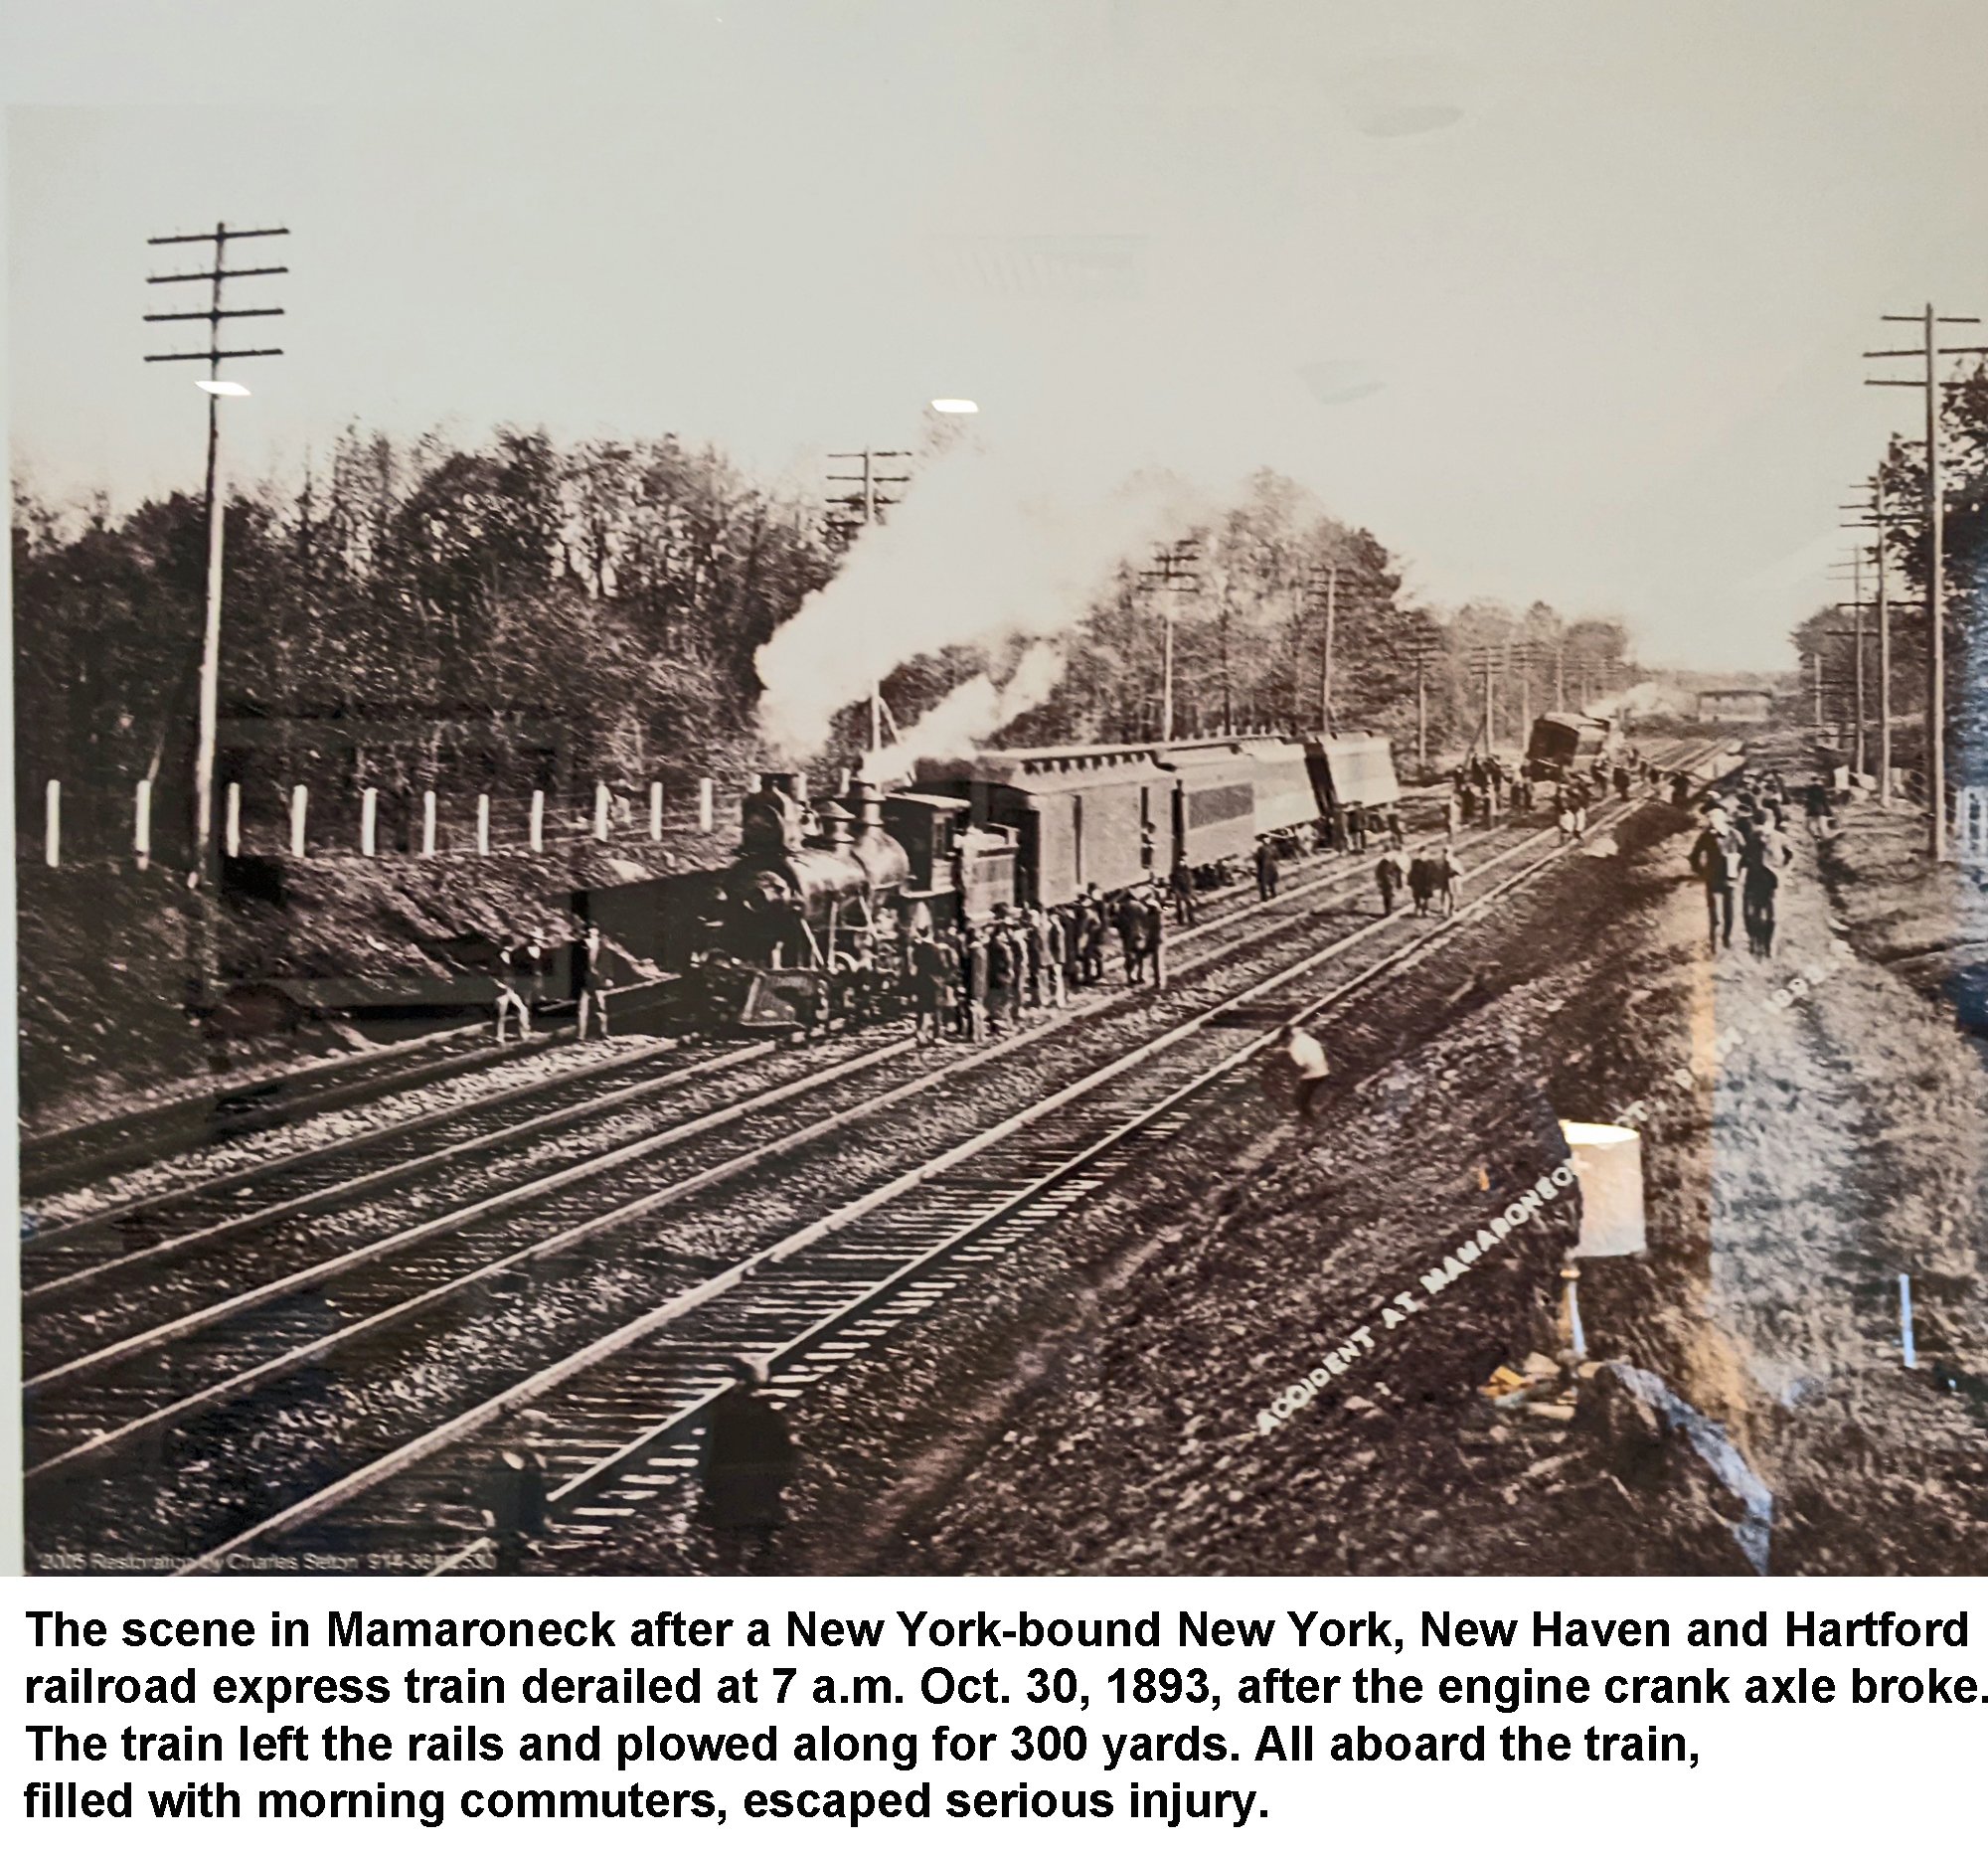 Train wreck 2 at Mamaroneck station Oct 30 1893 cropped 2 48px.jpg